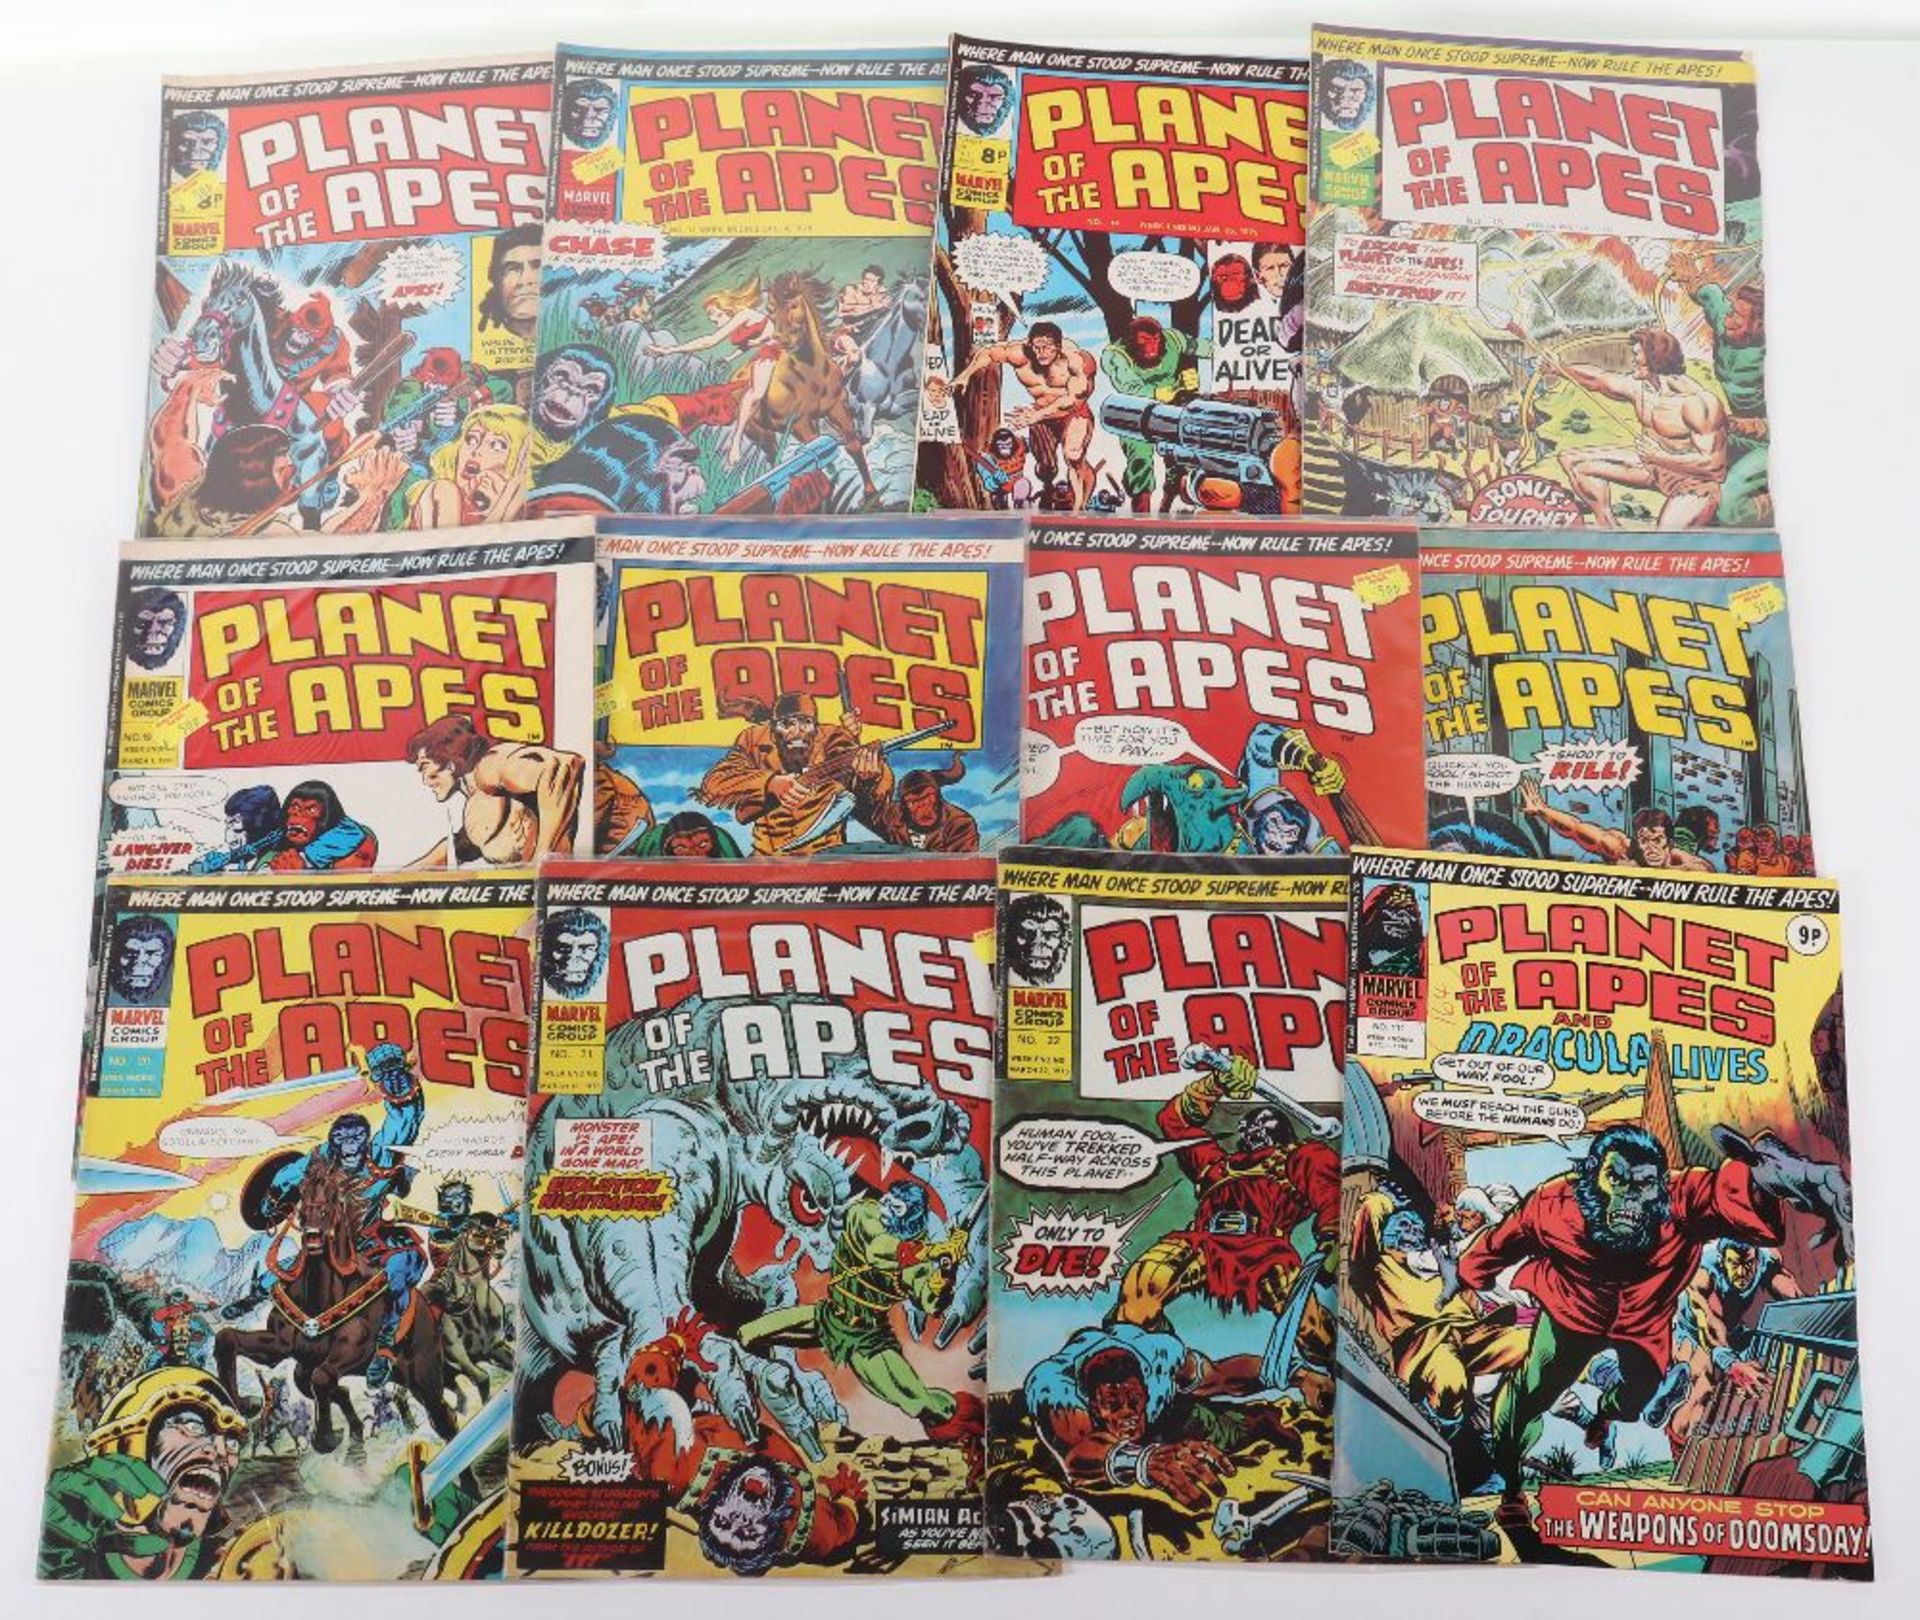 Vintage Marvel Comics group Planet of the Apes / Dracula lives Comics - Image 2 of 5